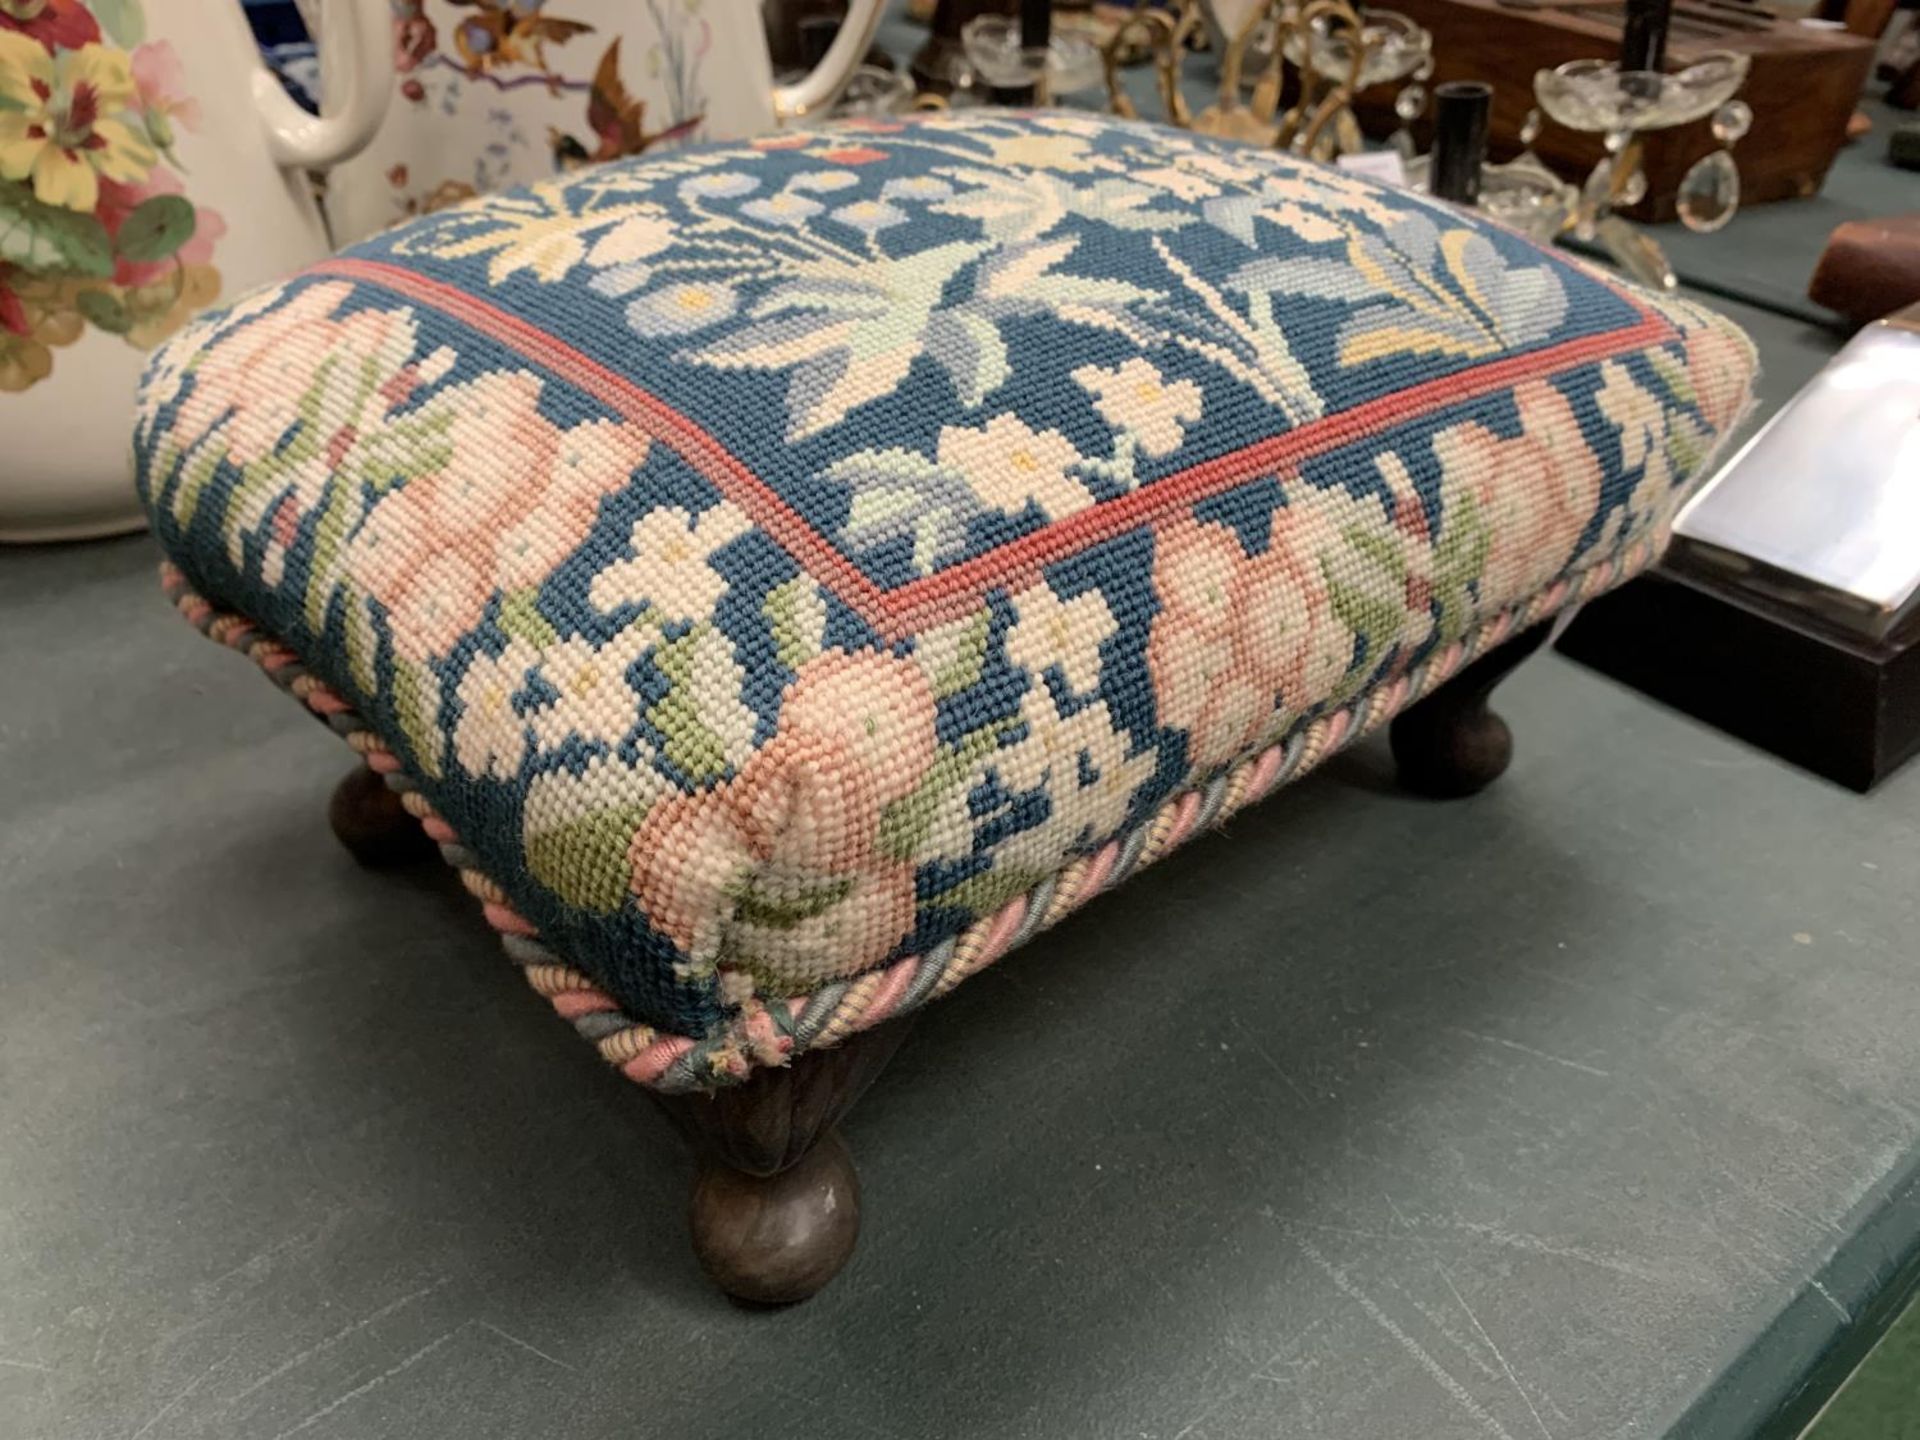 A SMALL VINTAGE FOOTSTOOL WITH MAHOGANY LEGS AND A TAPESTRY TOP 37CM X 25CM X 15CM - Image 2 of 3